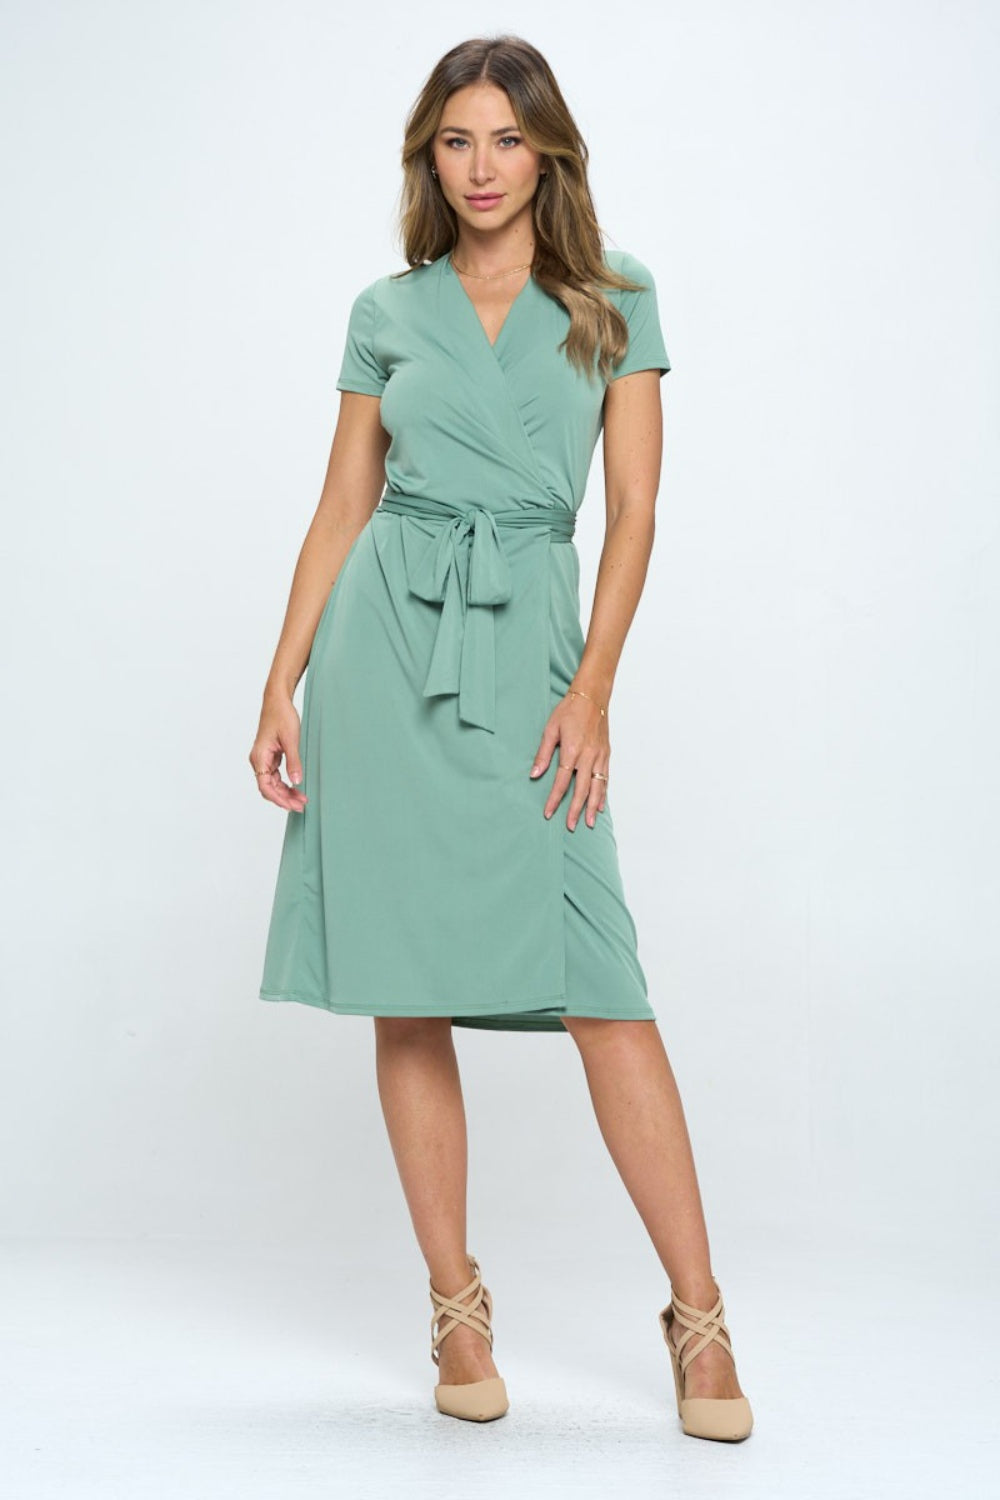 This tie front surplice short sleeve dress is a fabulous addition to your summer wardrobe. The surplice neckline creates a flattering silhouette while adding a touch of sophistication. The tie front detail at the waist adds a stylish and trendy element to the dress.  S  - L